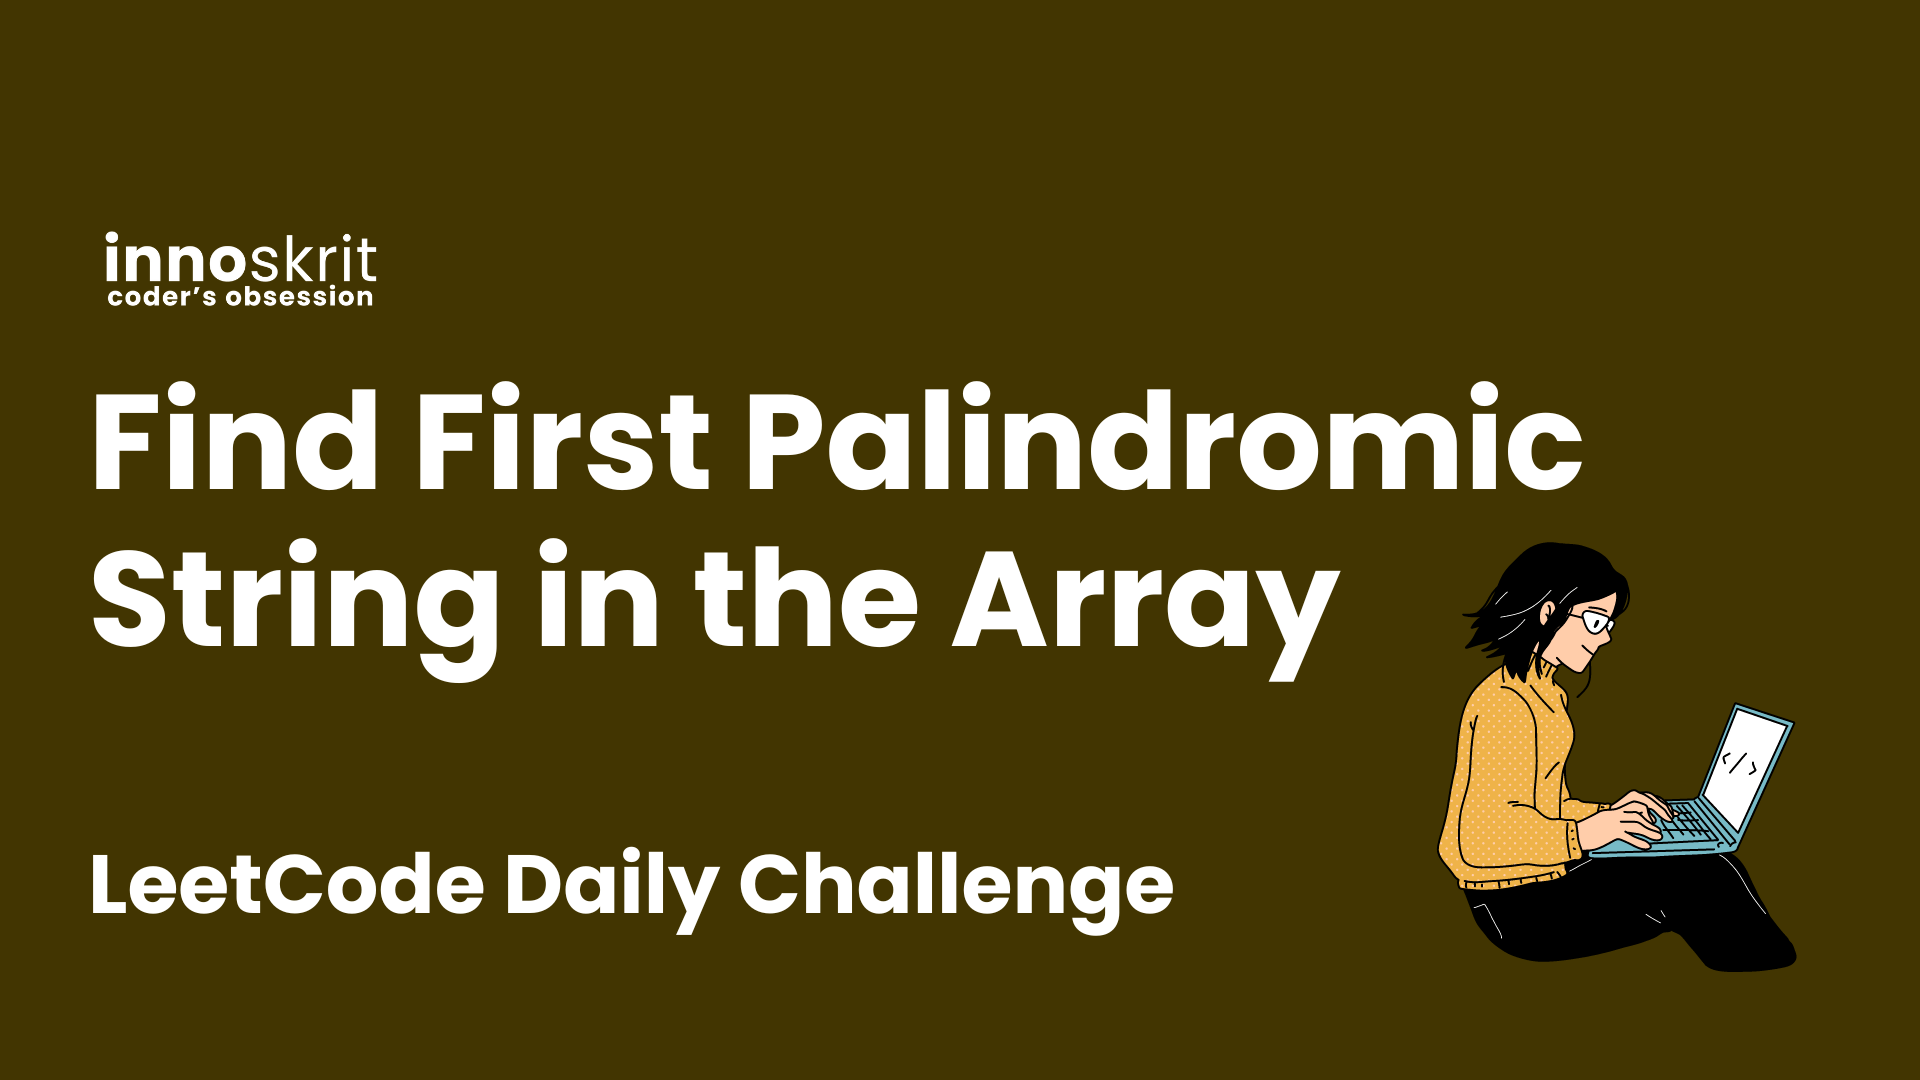 Find First Palindromic String in the Array - LeetCode Daily Challenge